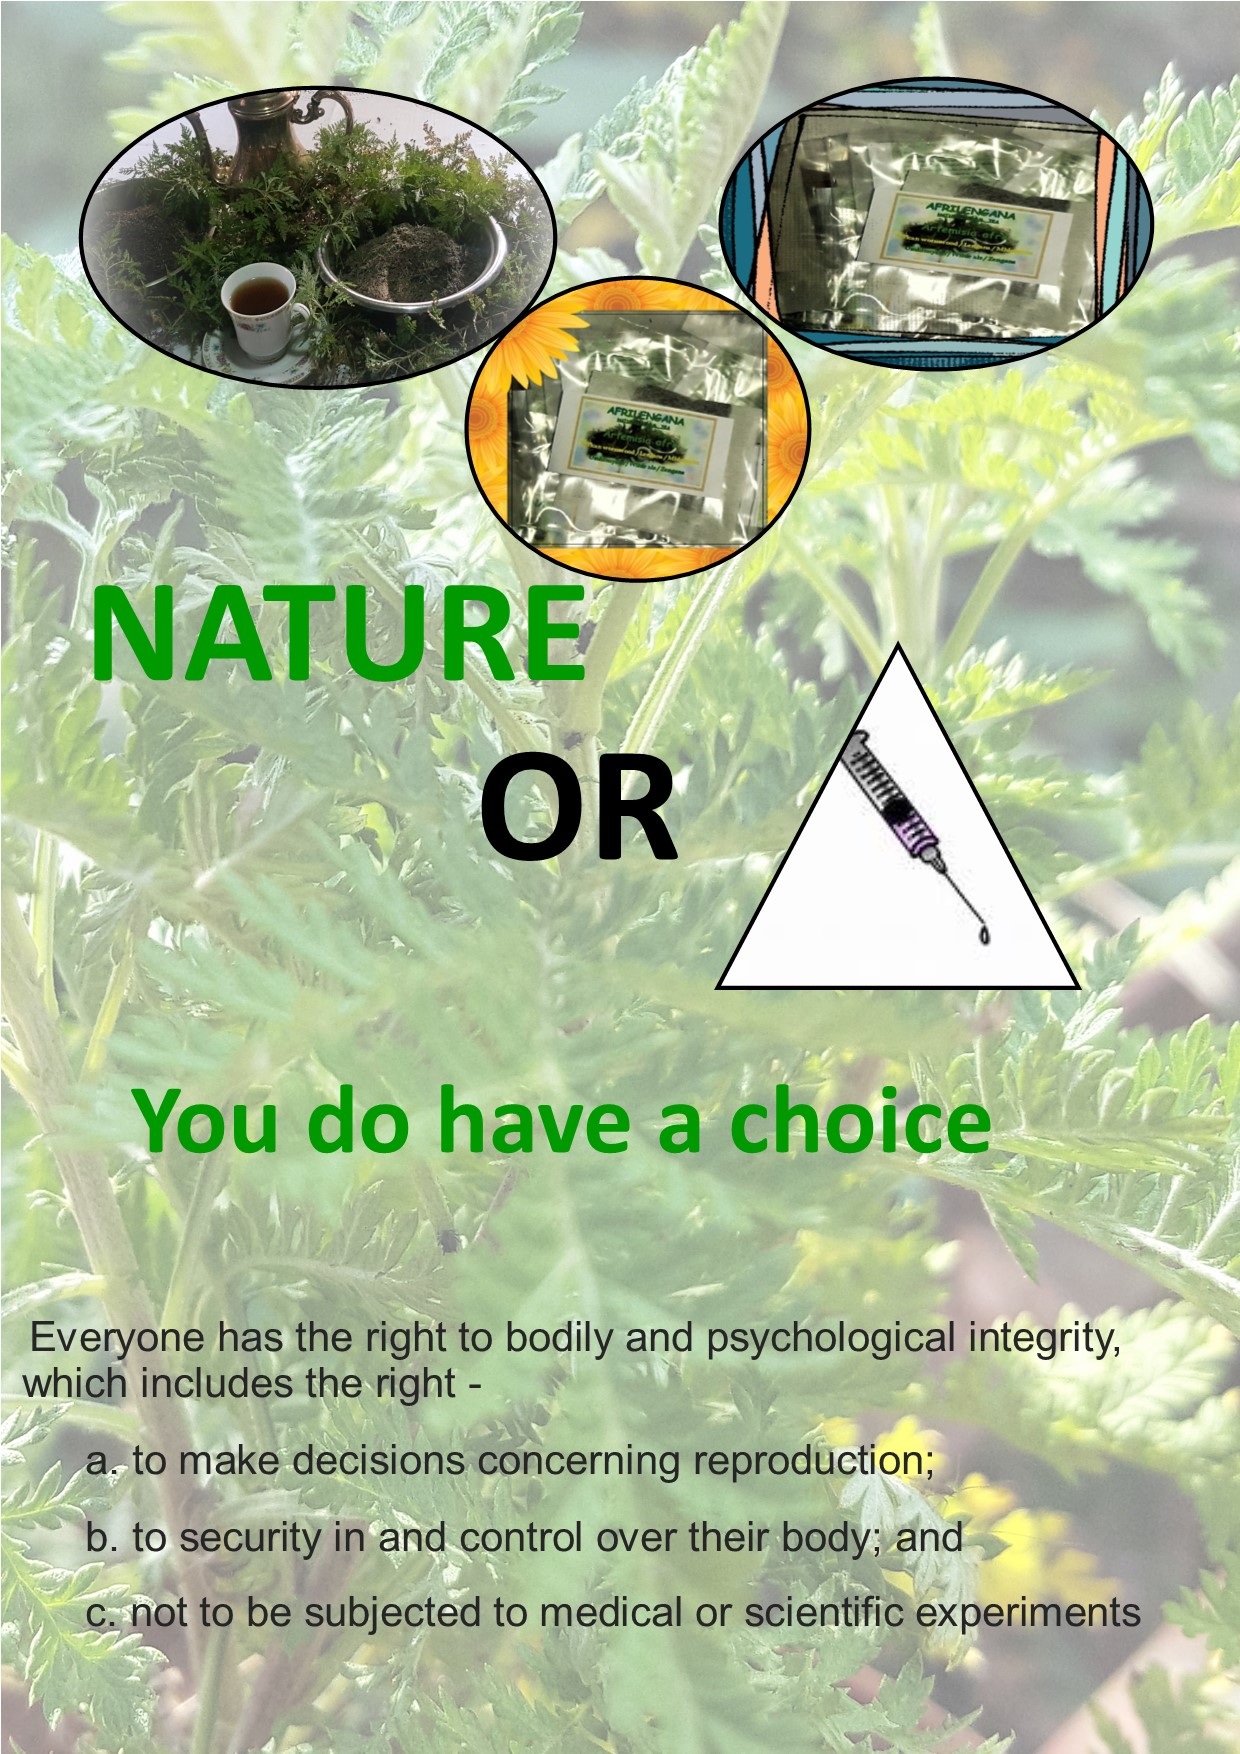 Nature or you do have a choicejpg